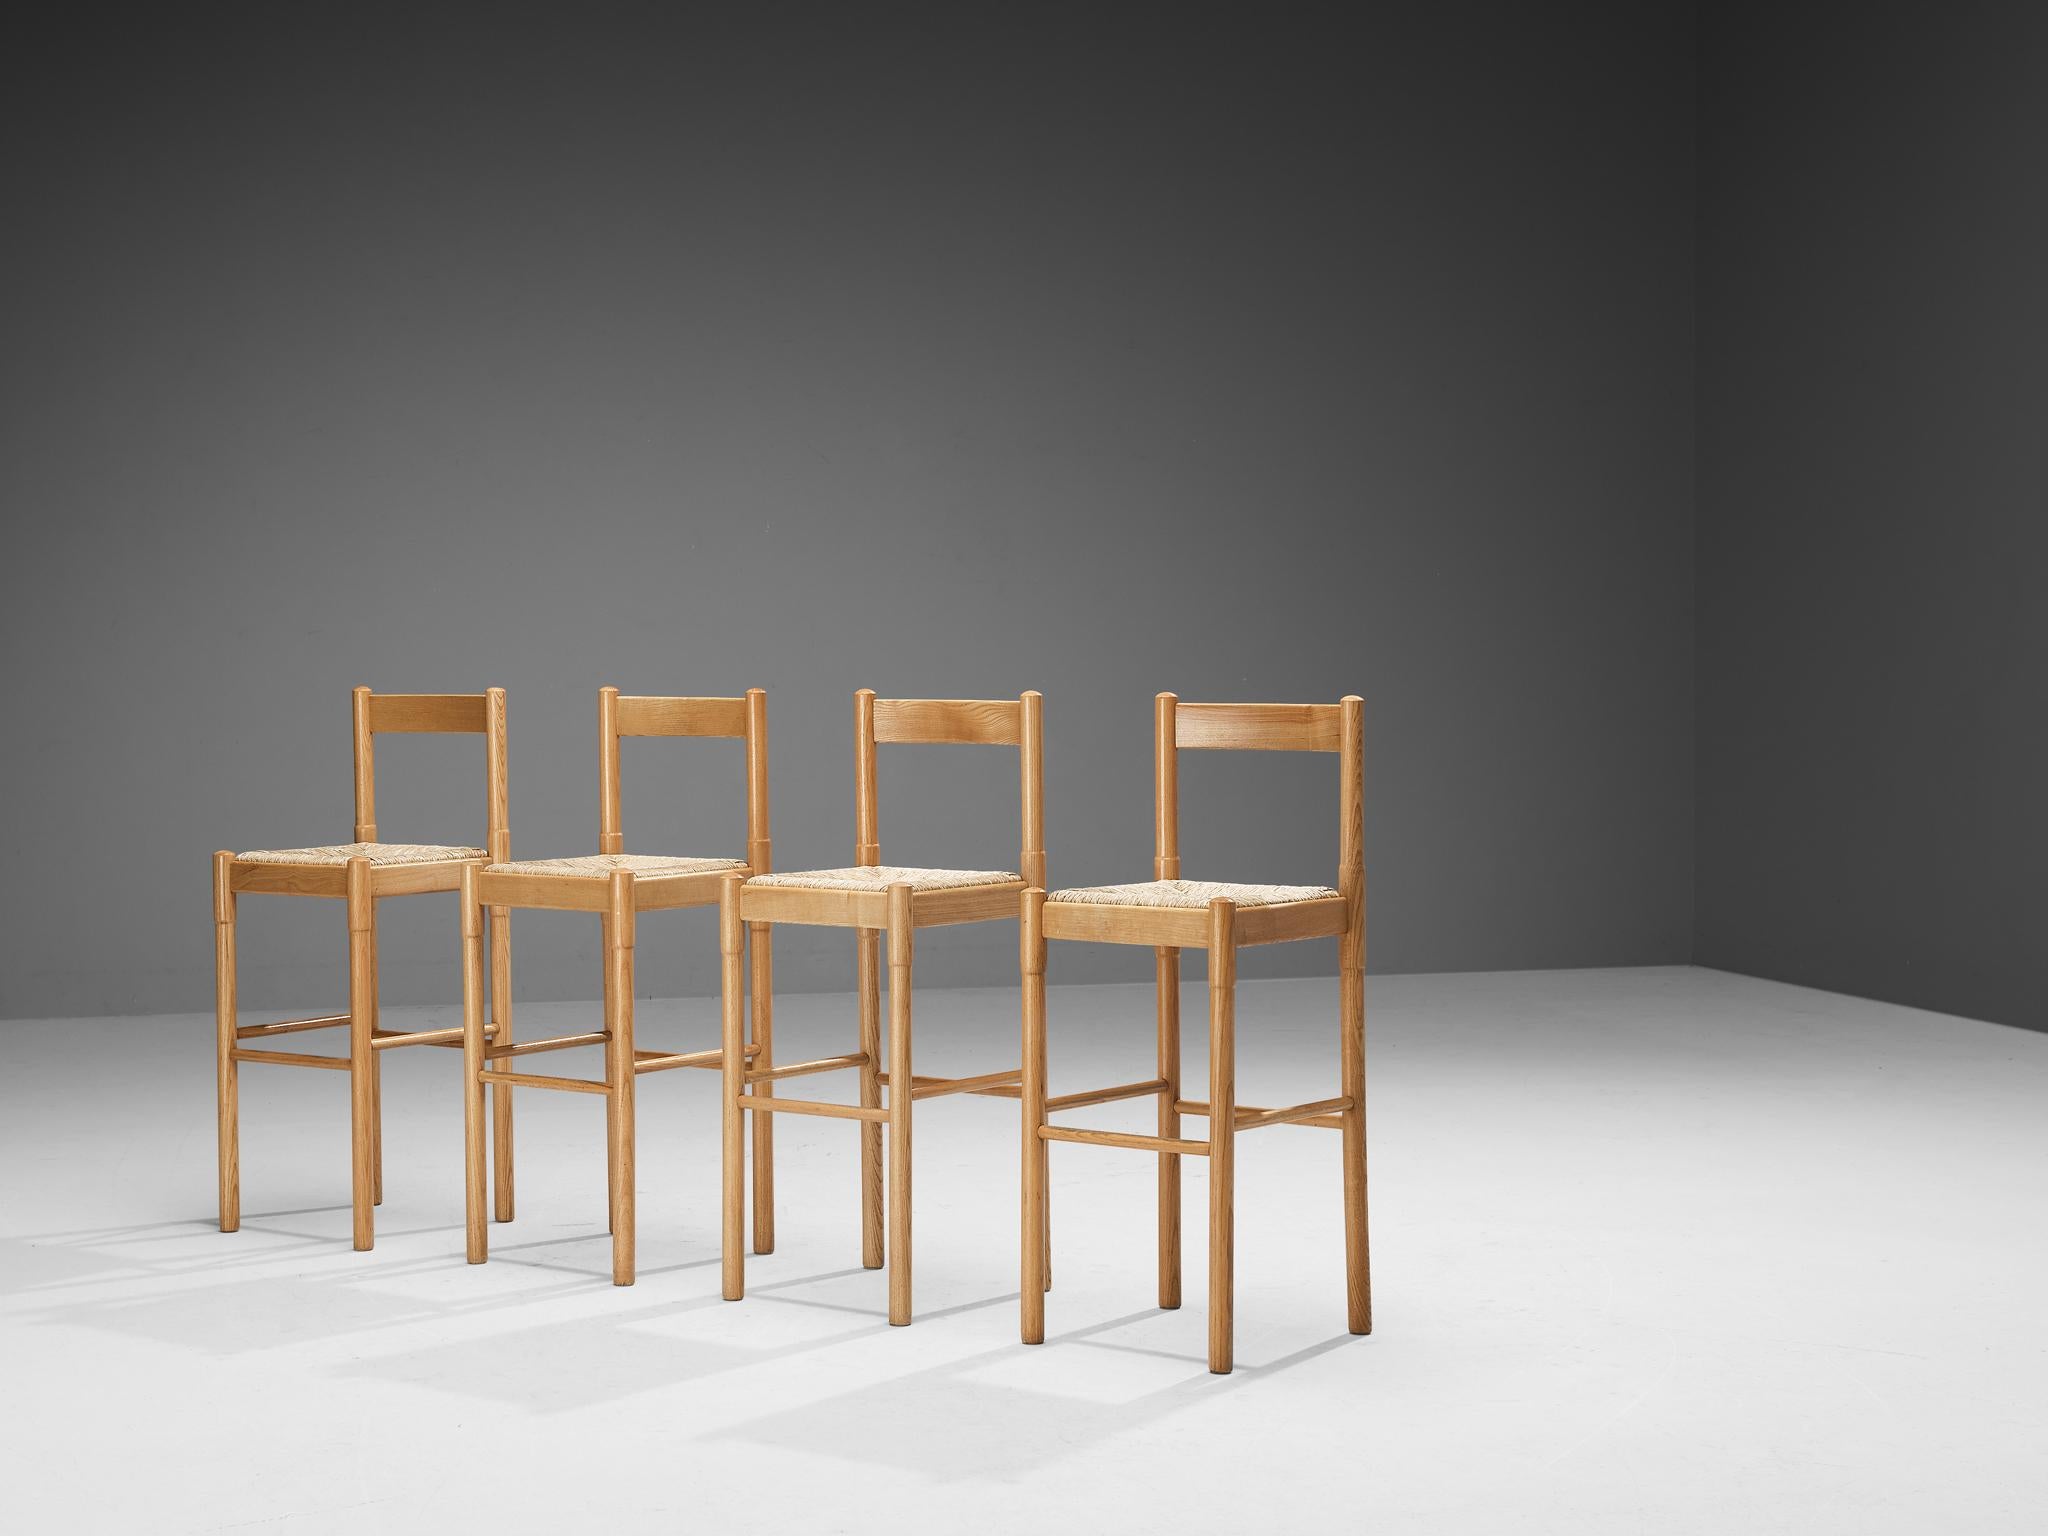 Vico Magistretti, set of four bar stools, straw and ash, Italy, 1960s

Italian set of five barstools by Vico Magistretti. The stools embody a simplistic, modest design. The frame is made of ash and is based on a geometric layout of clear lines and